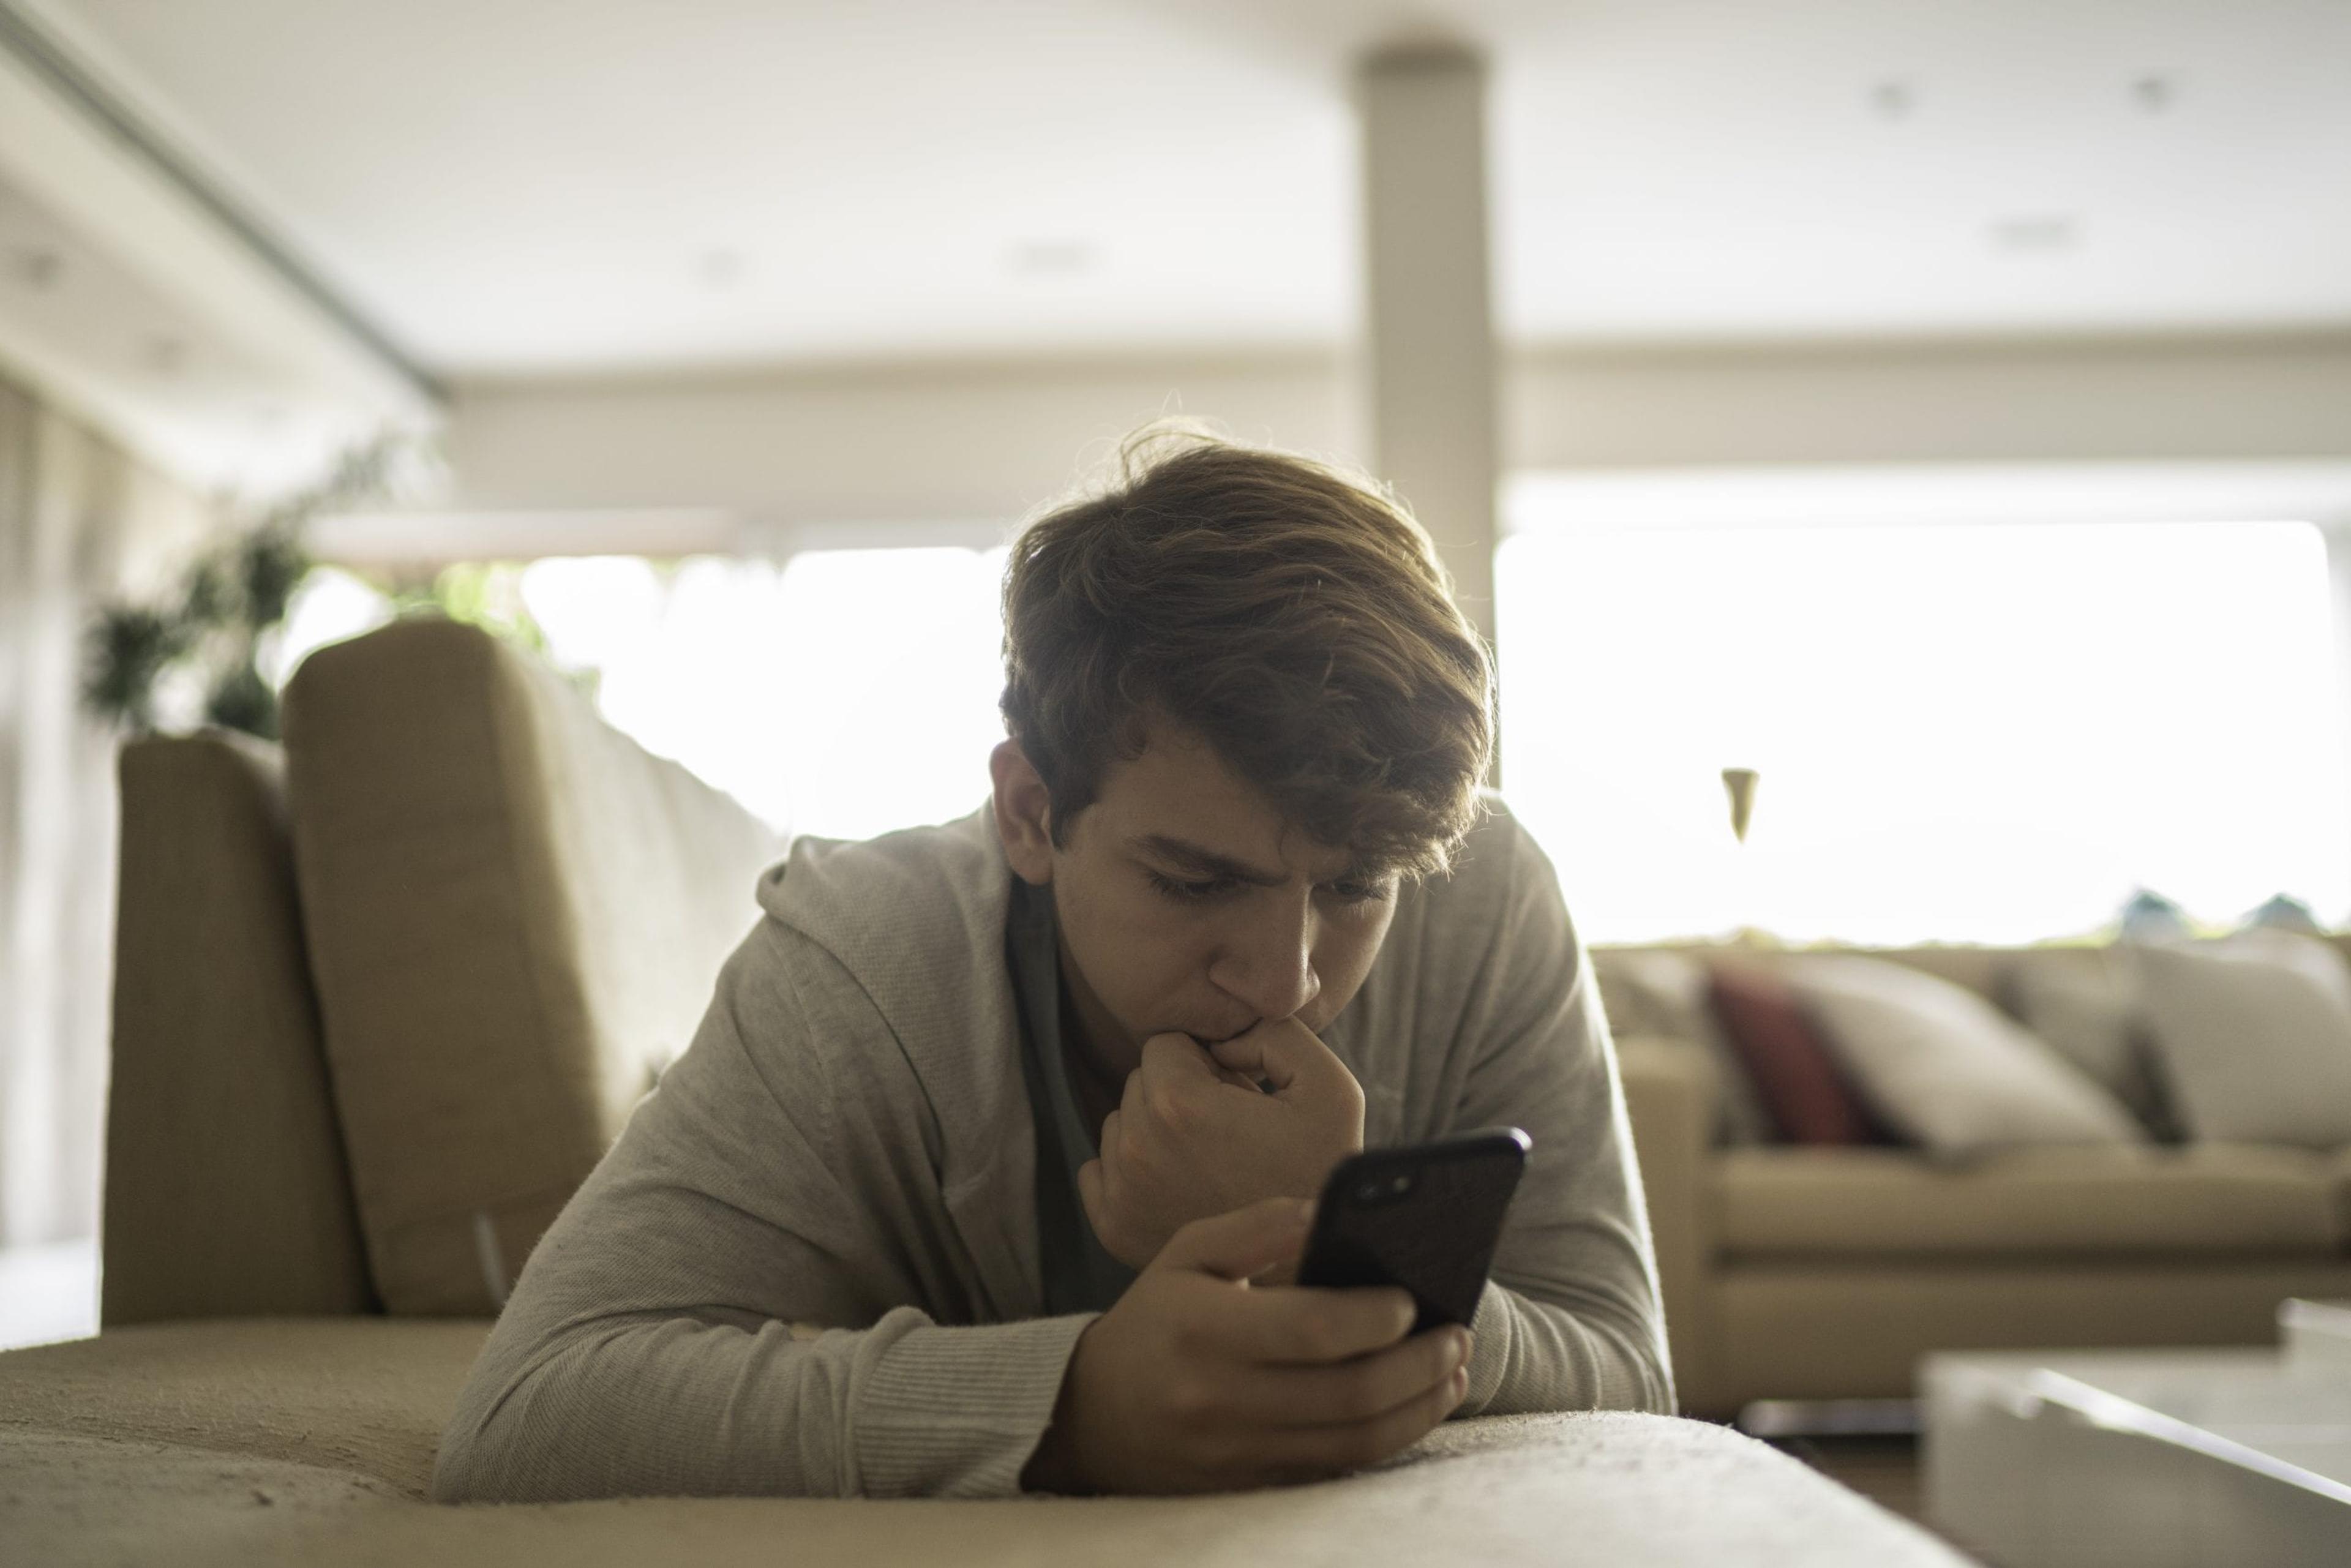 Teen looking at his phone with concern